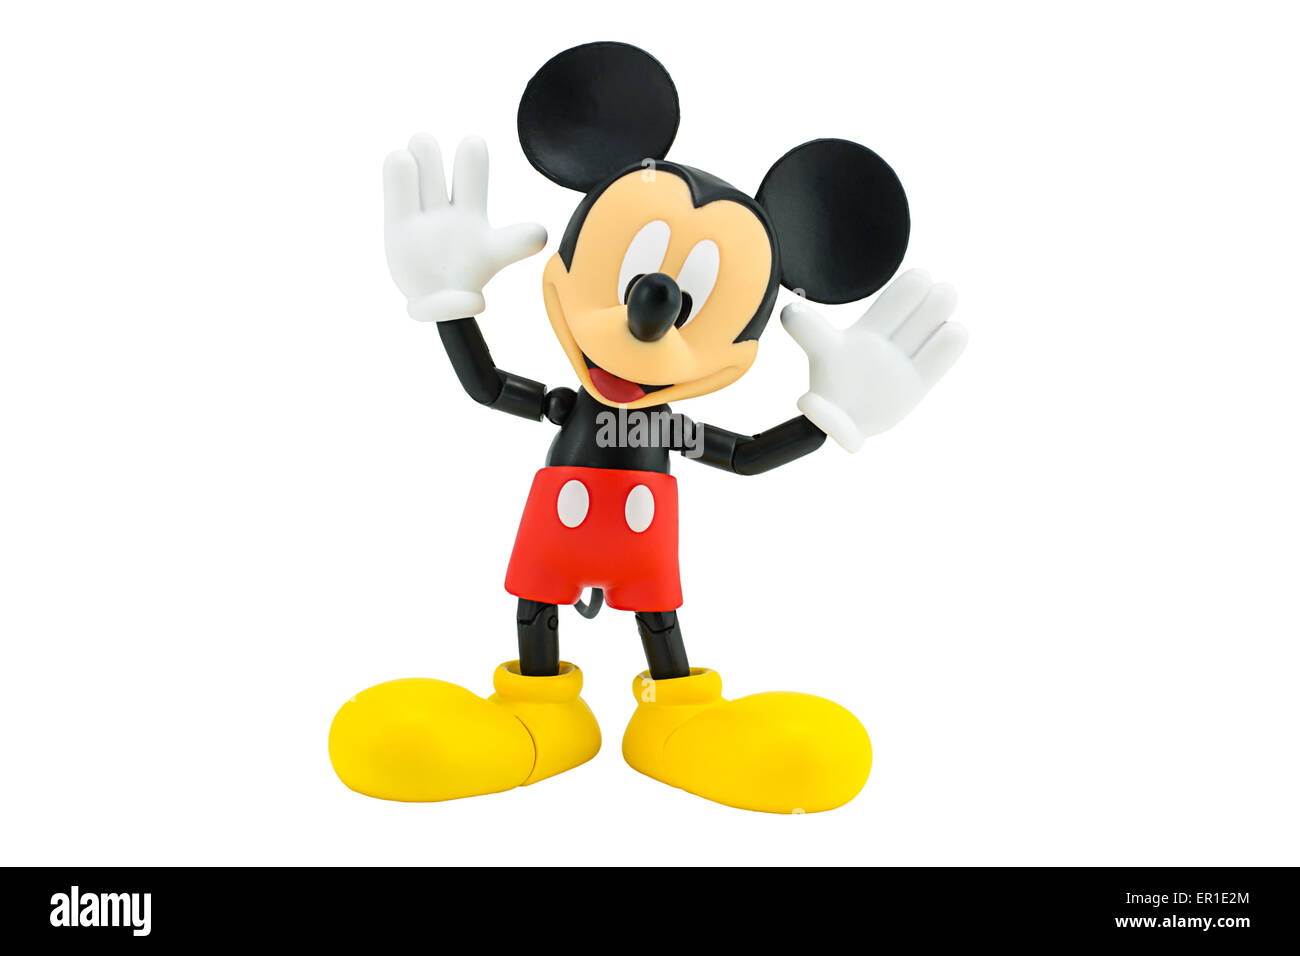 Mickey  mouse action figure from Disney character. This character from Mickey mouse and friend Stock Photo